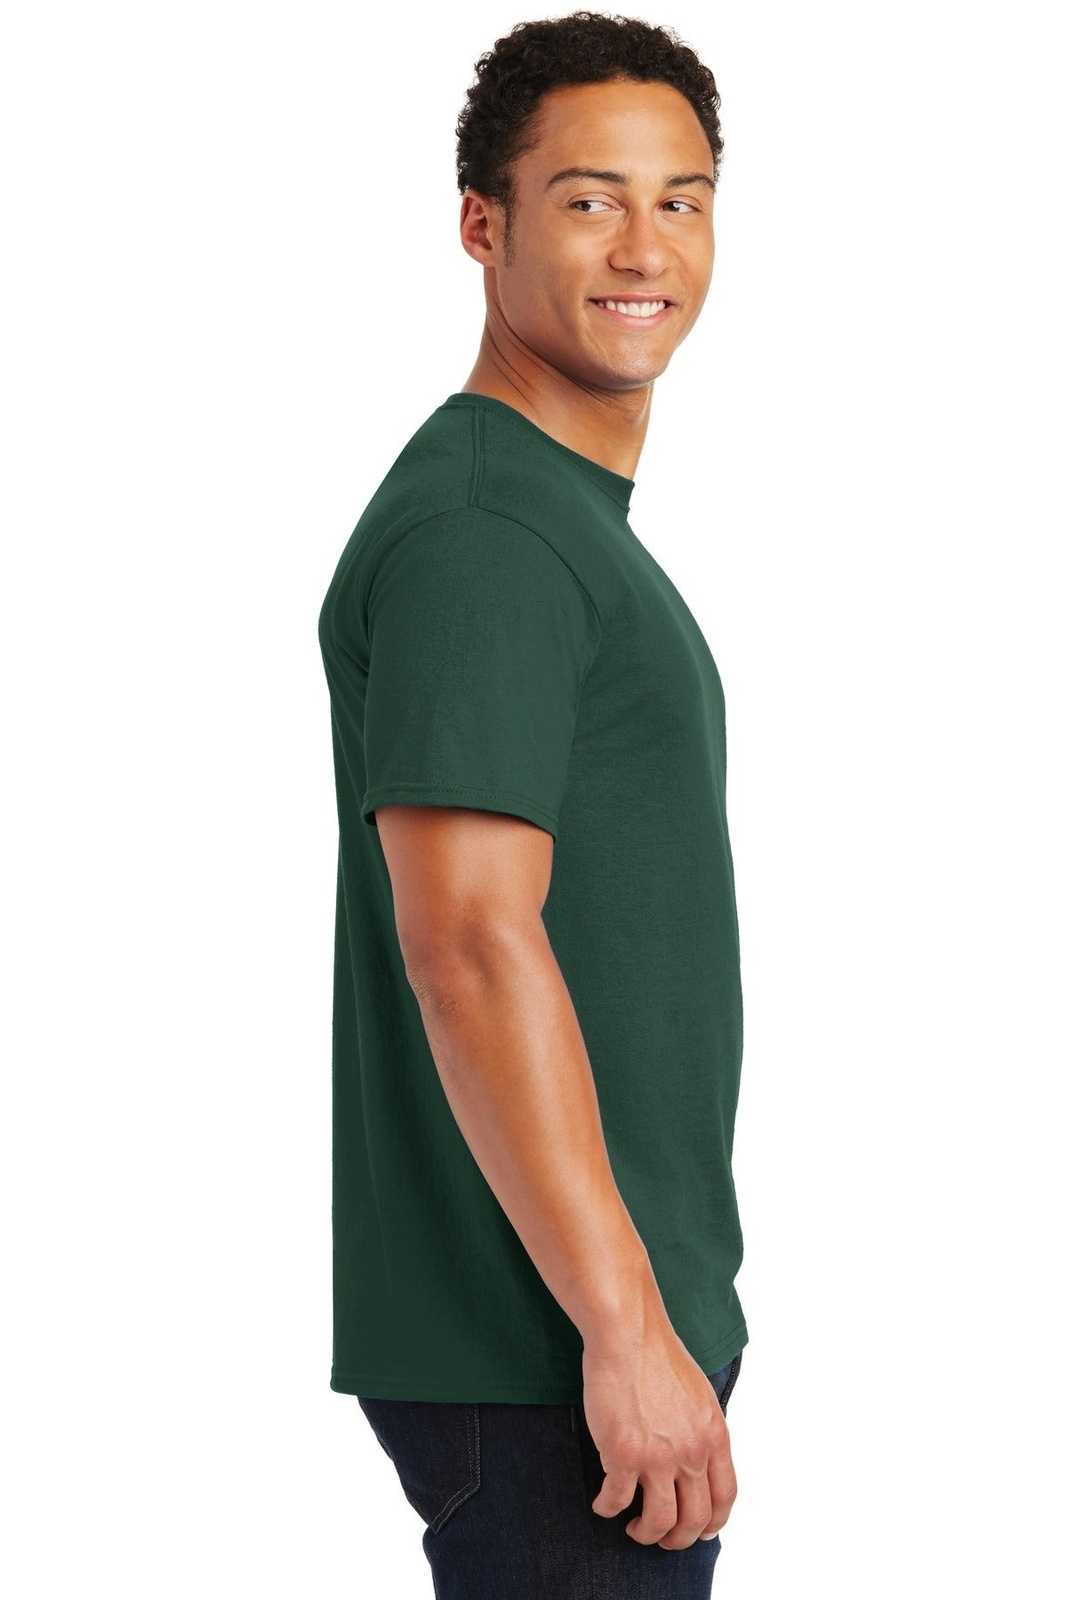 Jerzees 29M Dri-Power Active 50/50 Cotton/Poly T-Shirt - Forest Green - HIT a Double